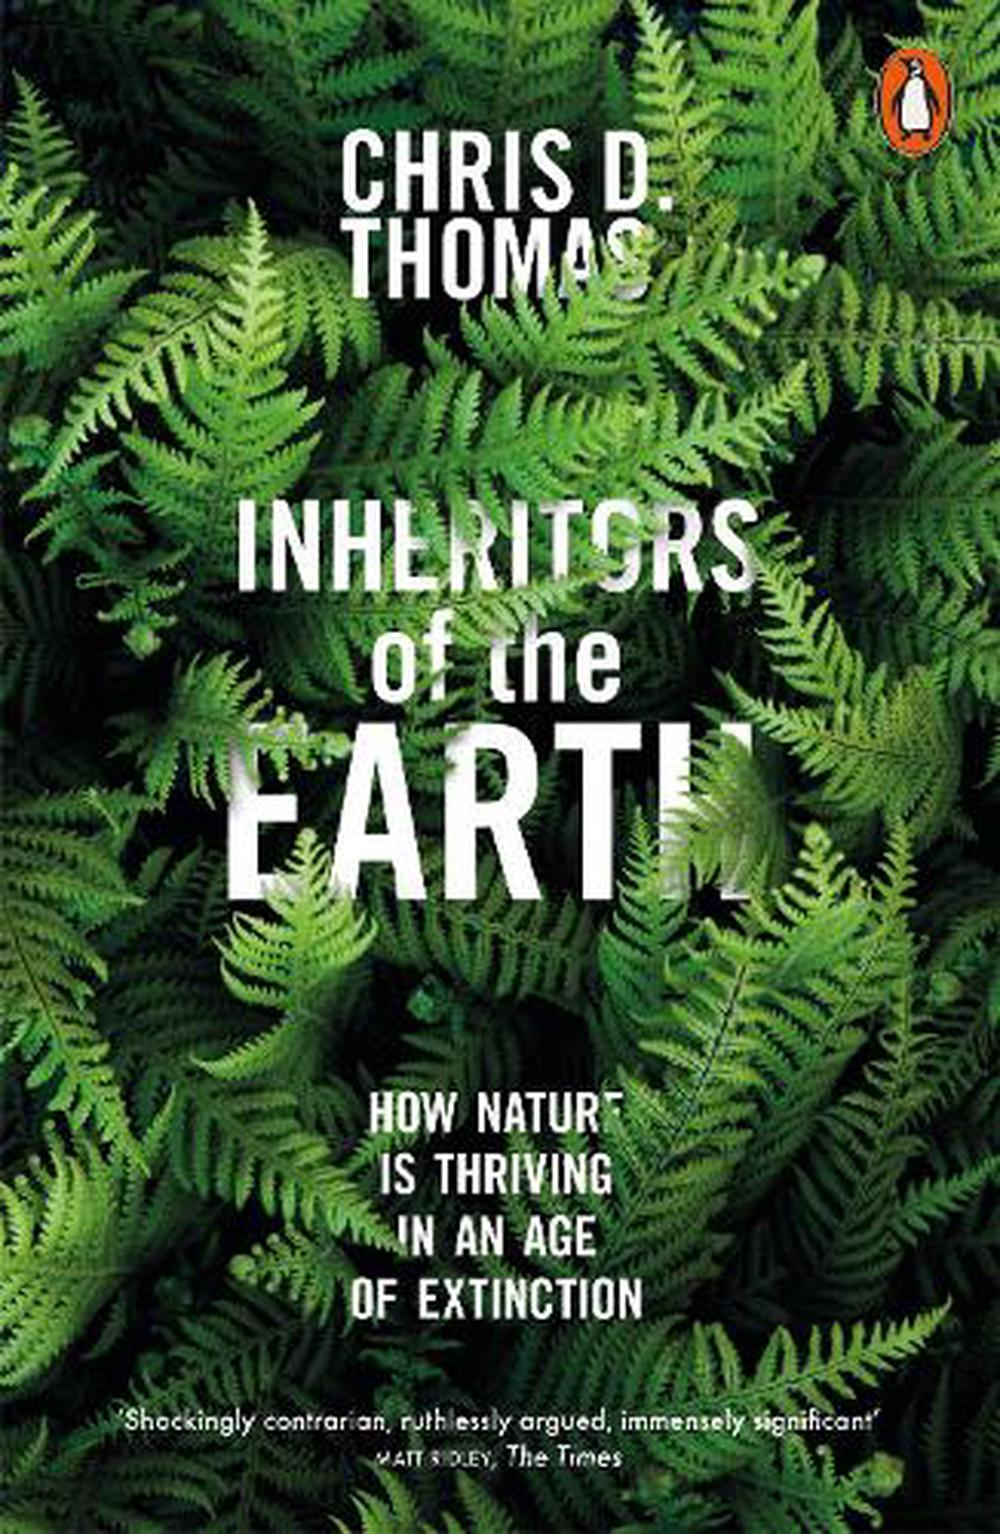 Inheritors of the Earth by Chris D. Thomas